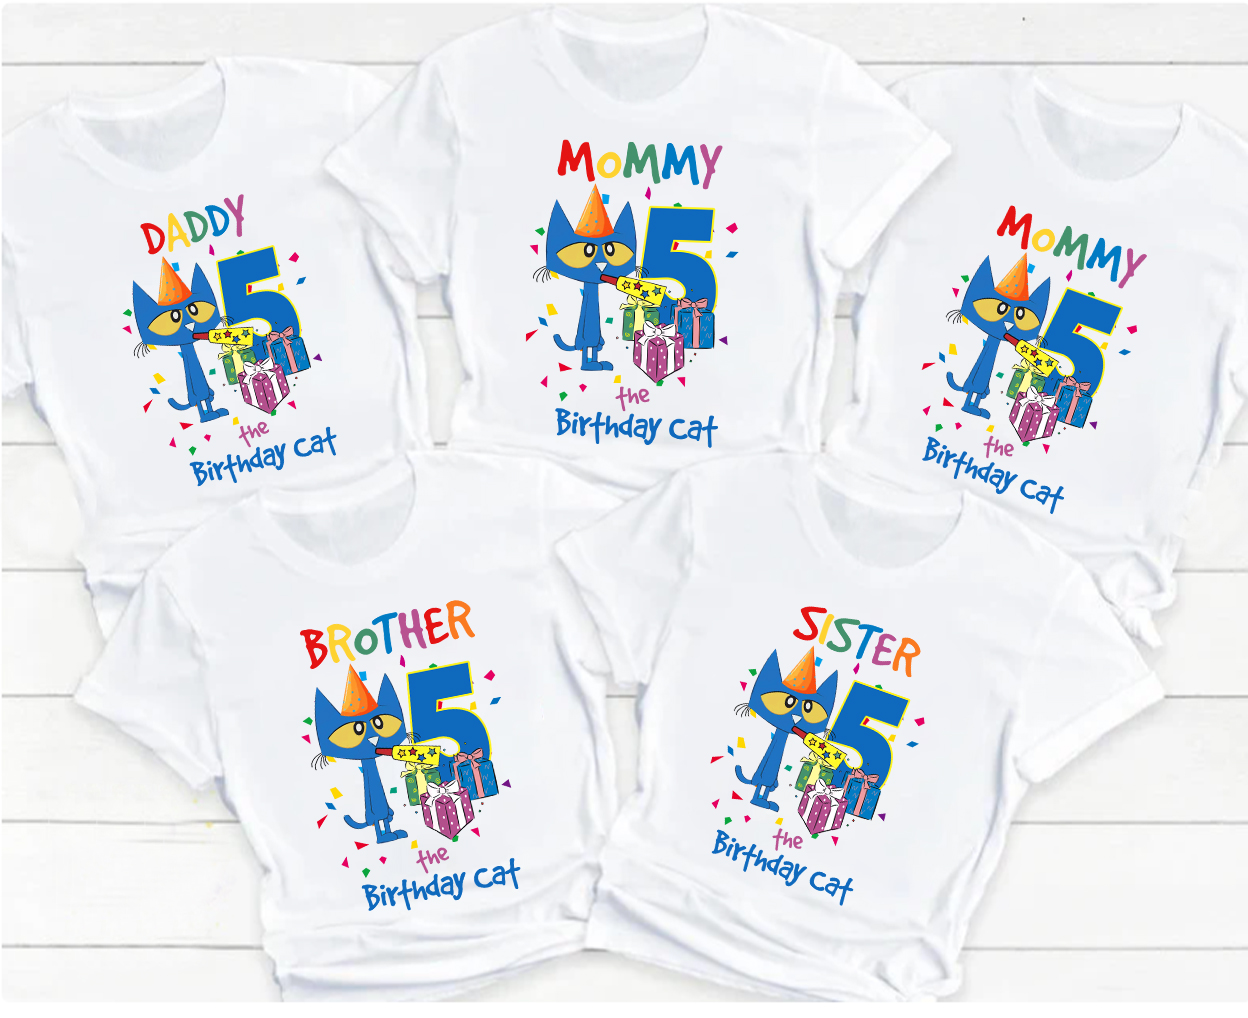 Personalized Pete The Cat Birthday Shirt, Funny Blue Cat Cartoon Kids Toddler shirt, Custom Birthday Gift For Son Daughter, cat lover tee